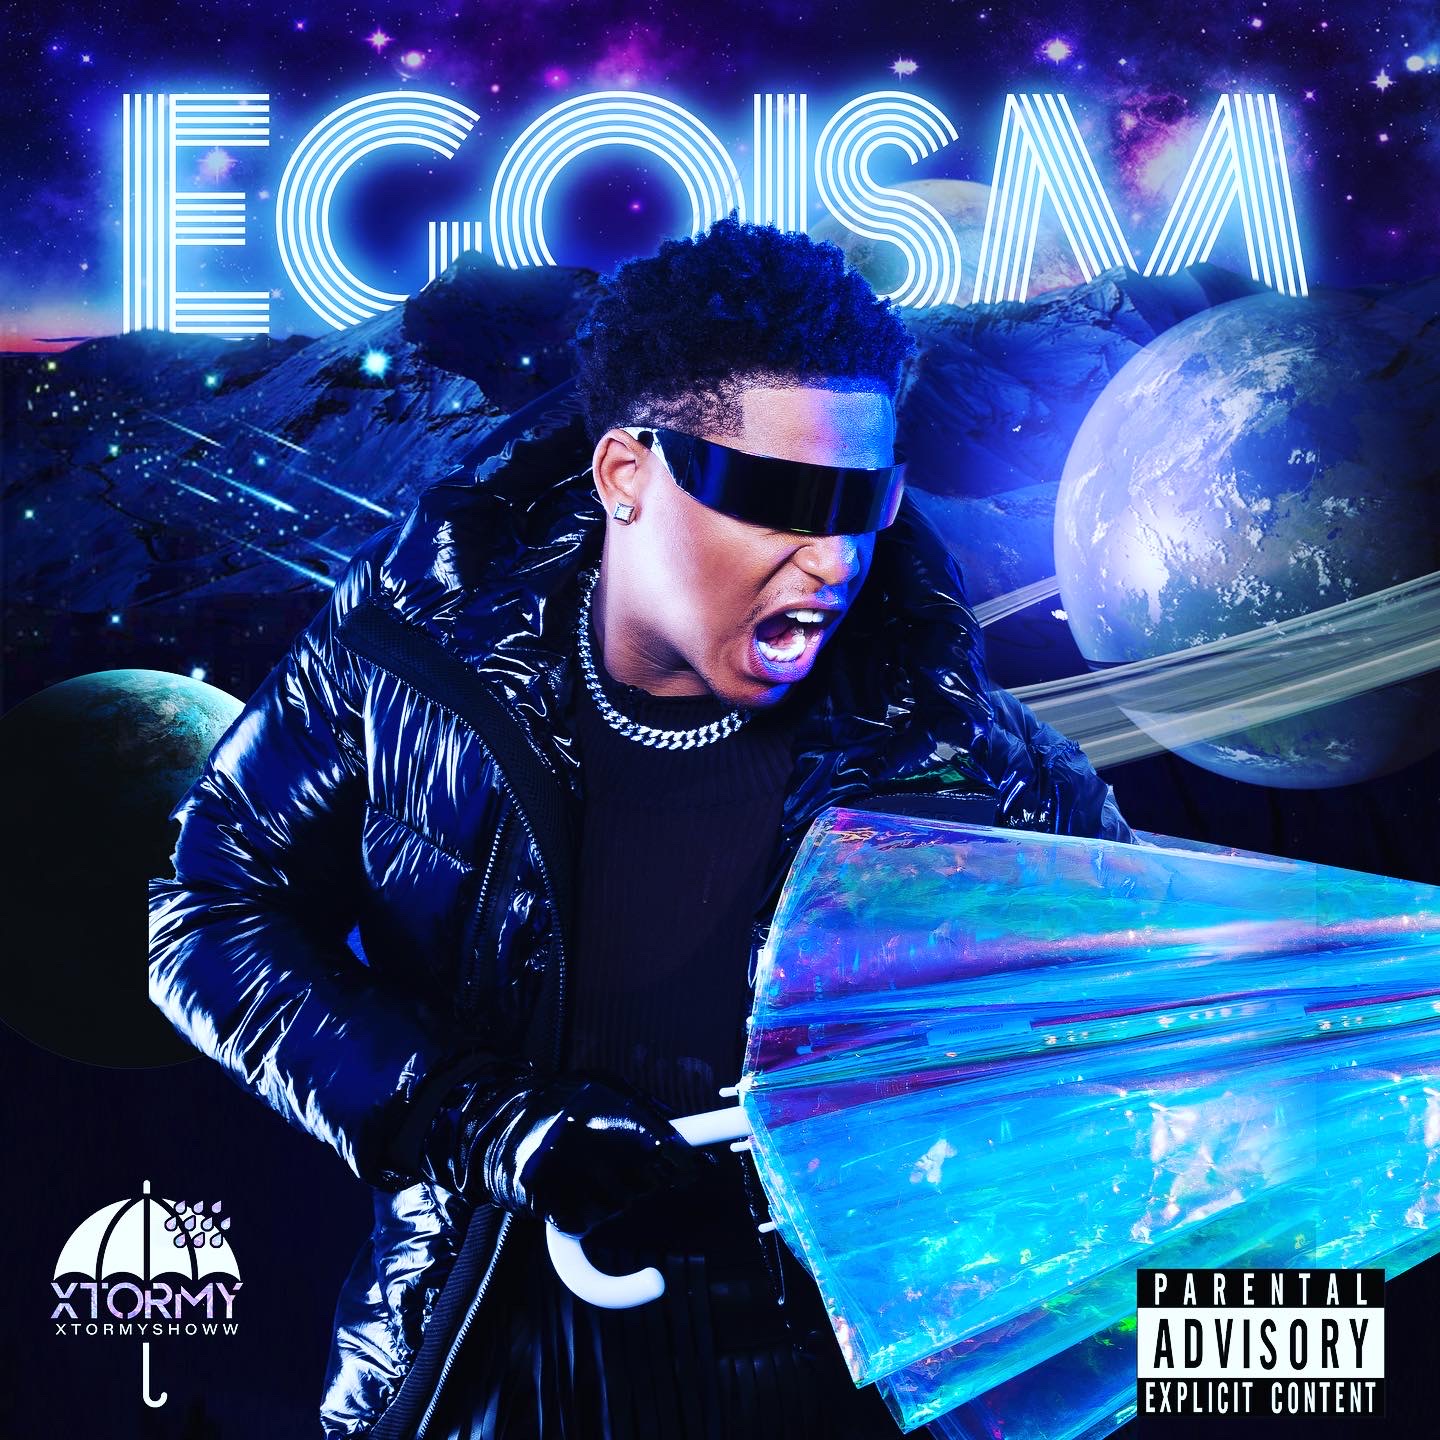 UPCOMING CHICAGO MUSIC ARTIST XTORMY DROPS HIS NEW EP “EGOISM”